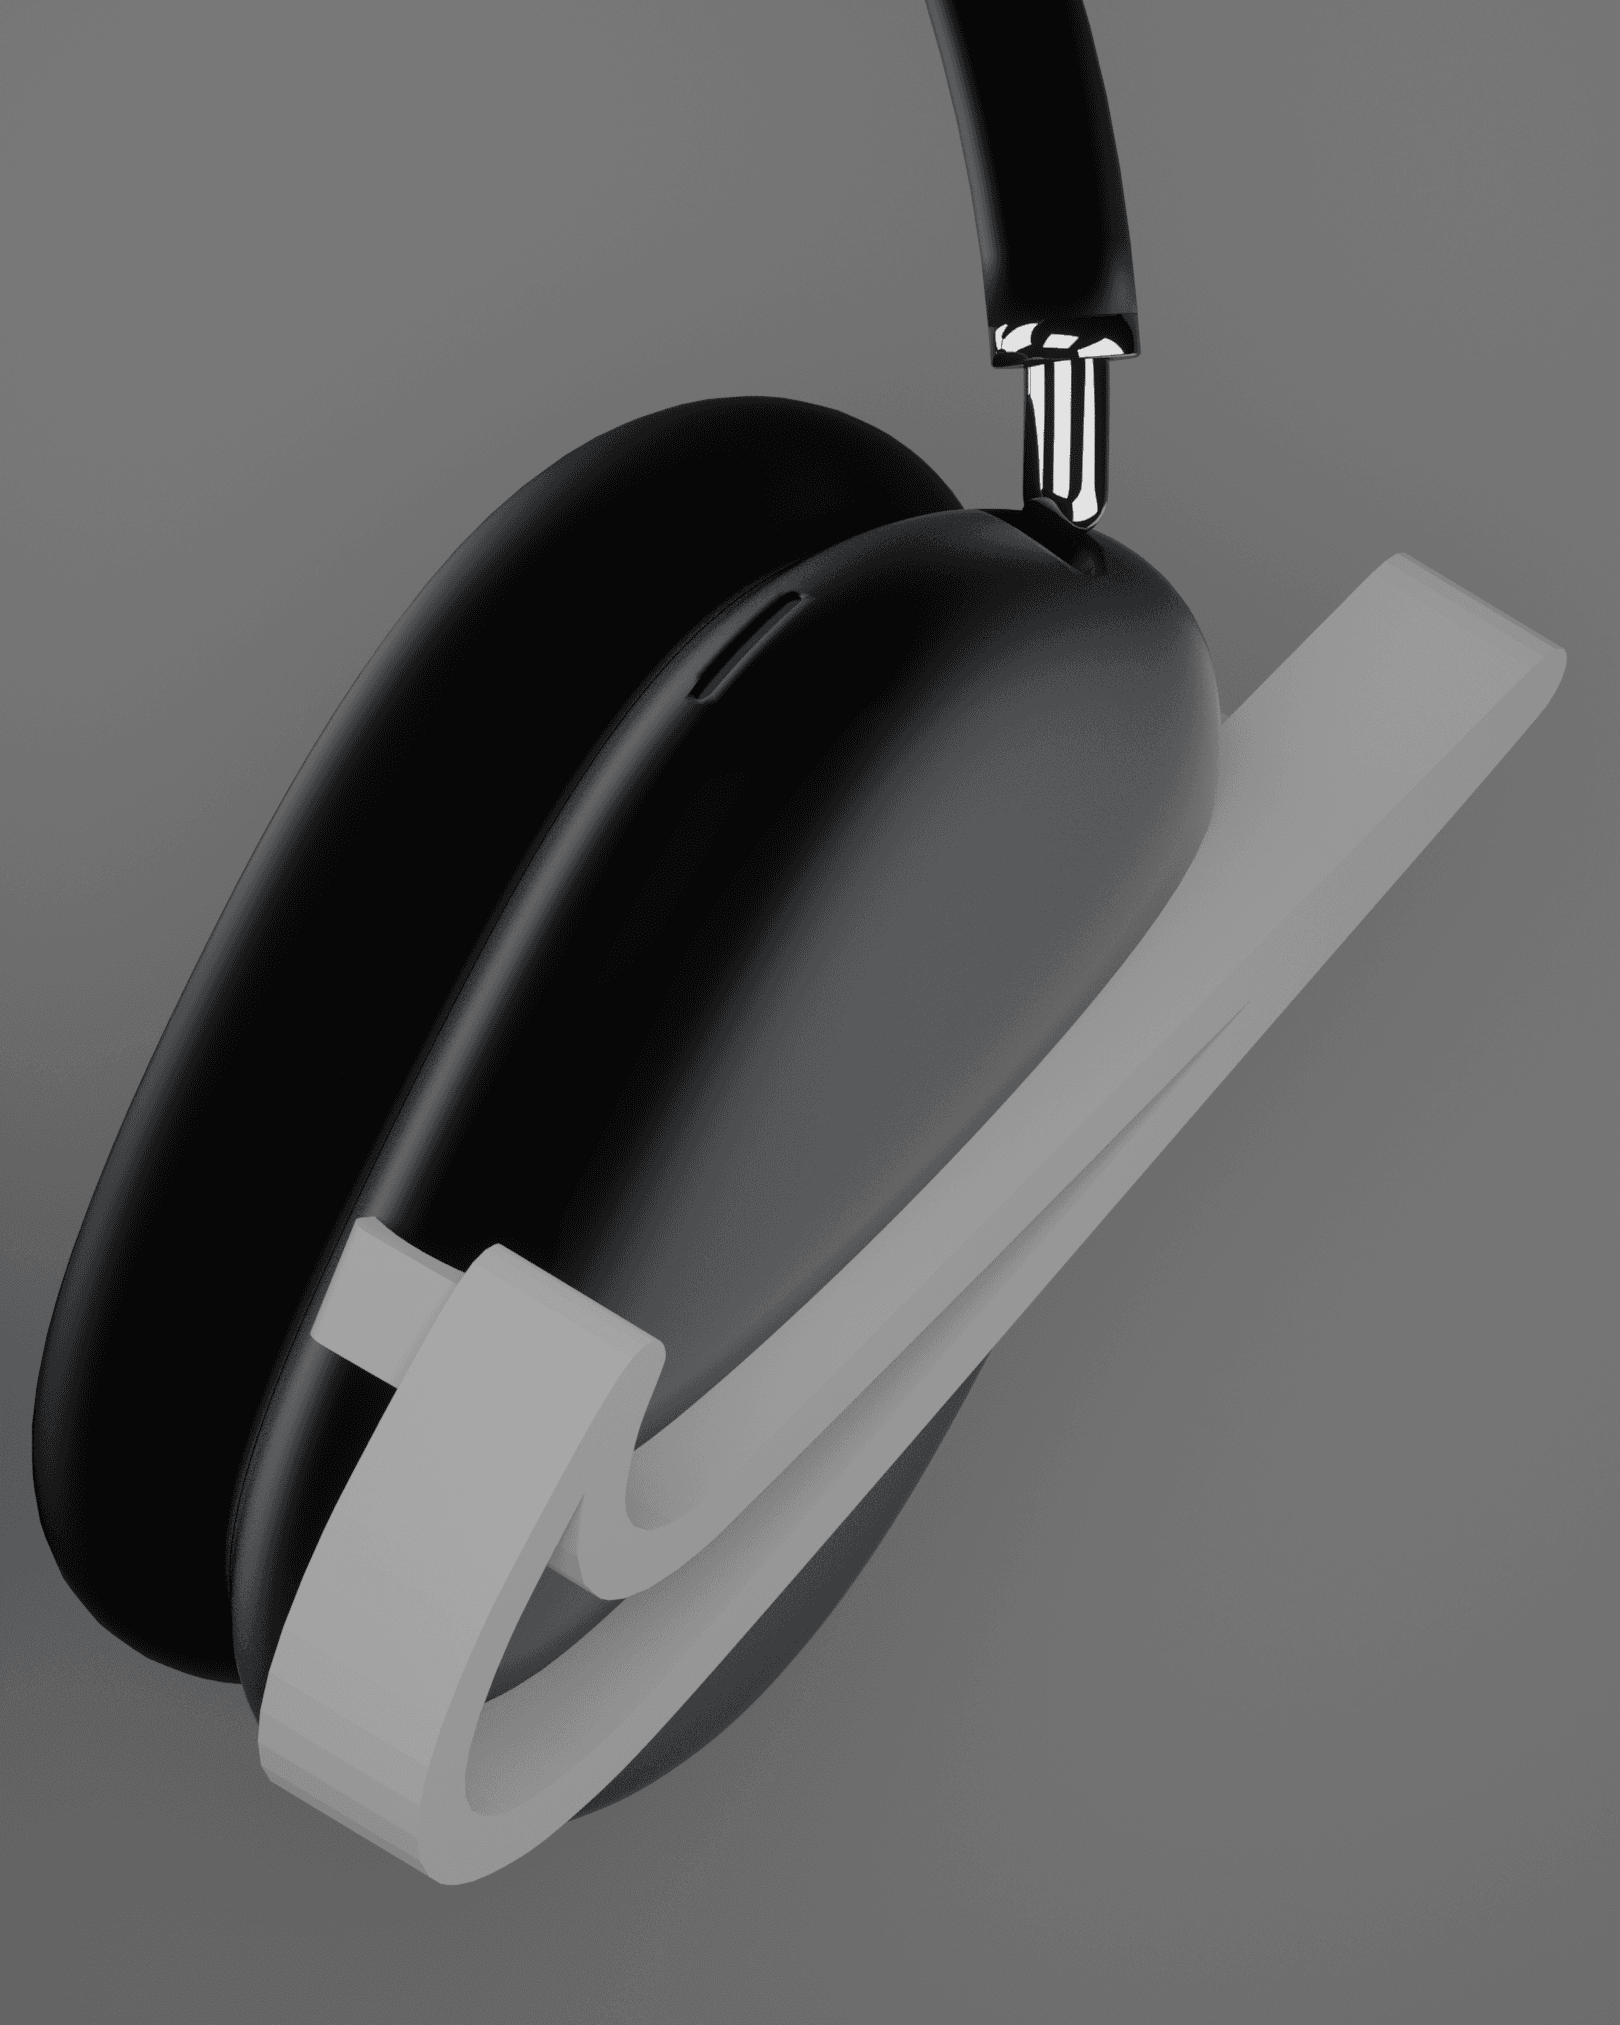 V5 NIKE AIRPODS MAX ACCESSORY  3d model